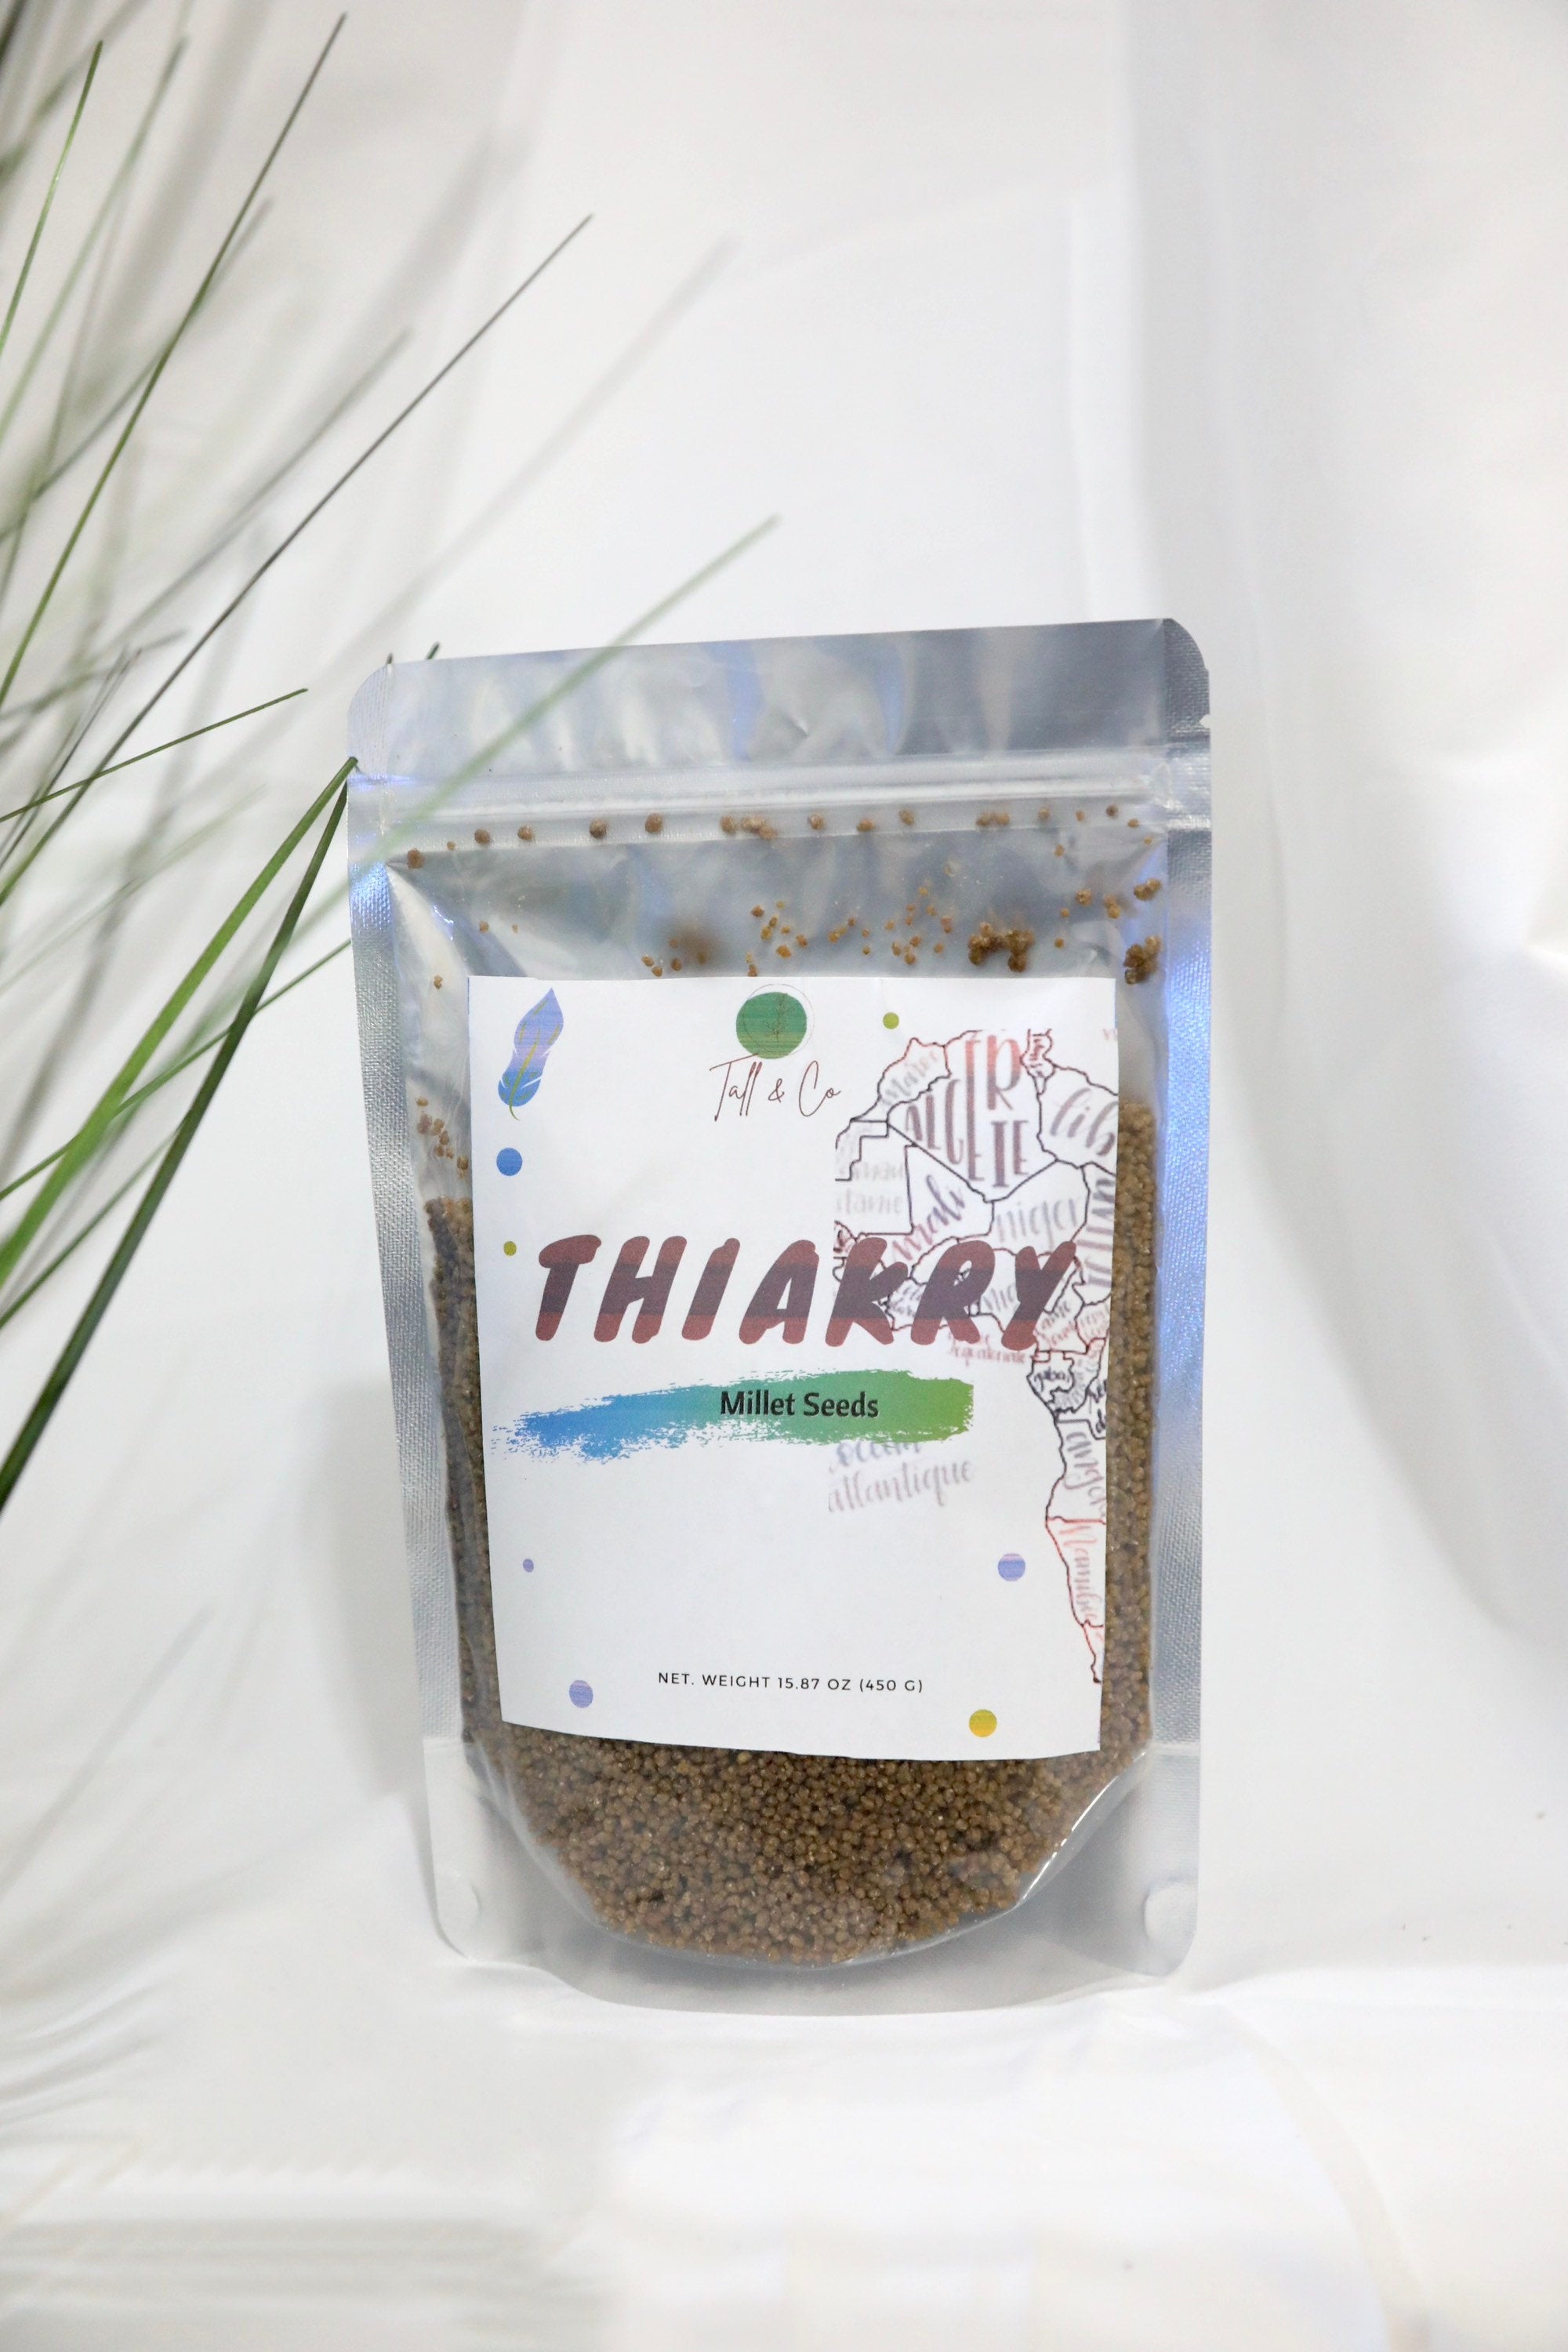 Thiacry / millet Seeds 450g